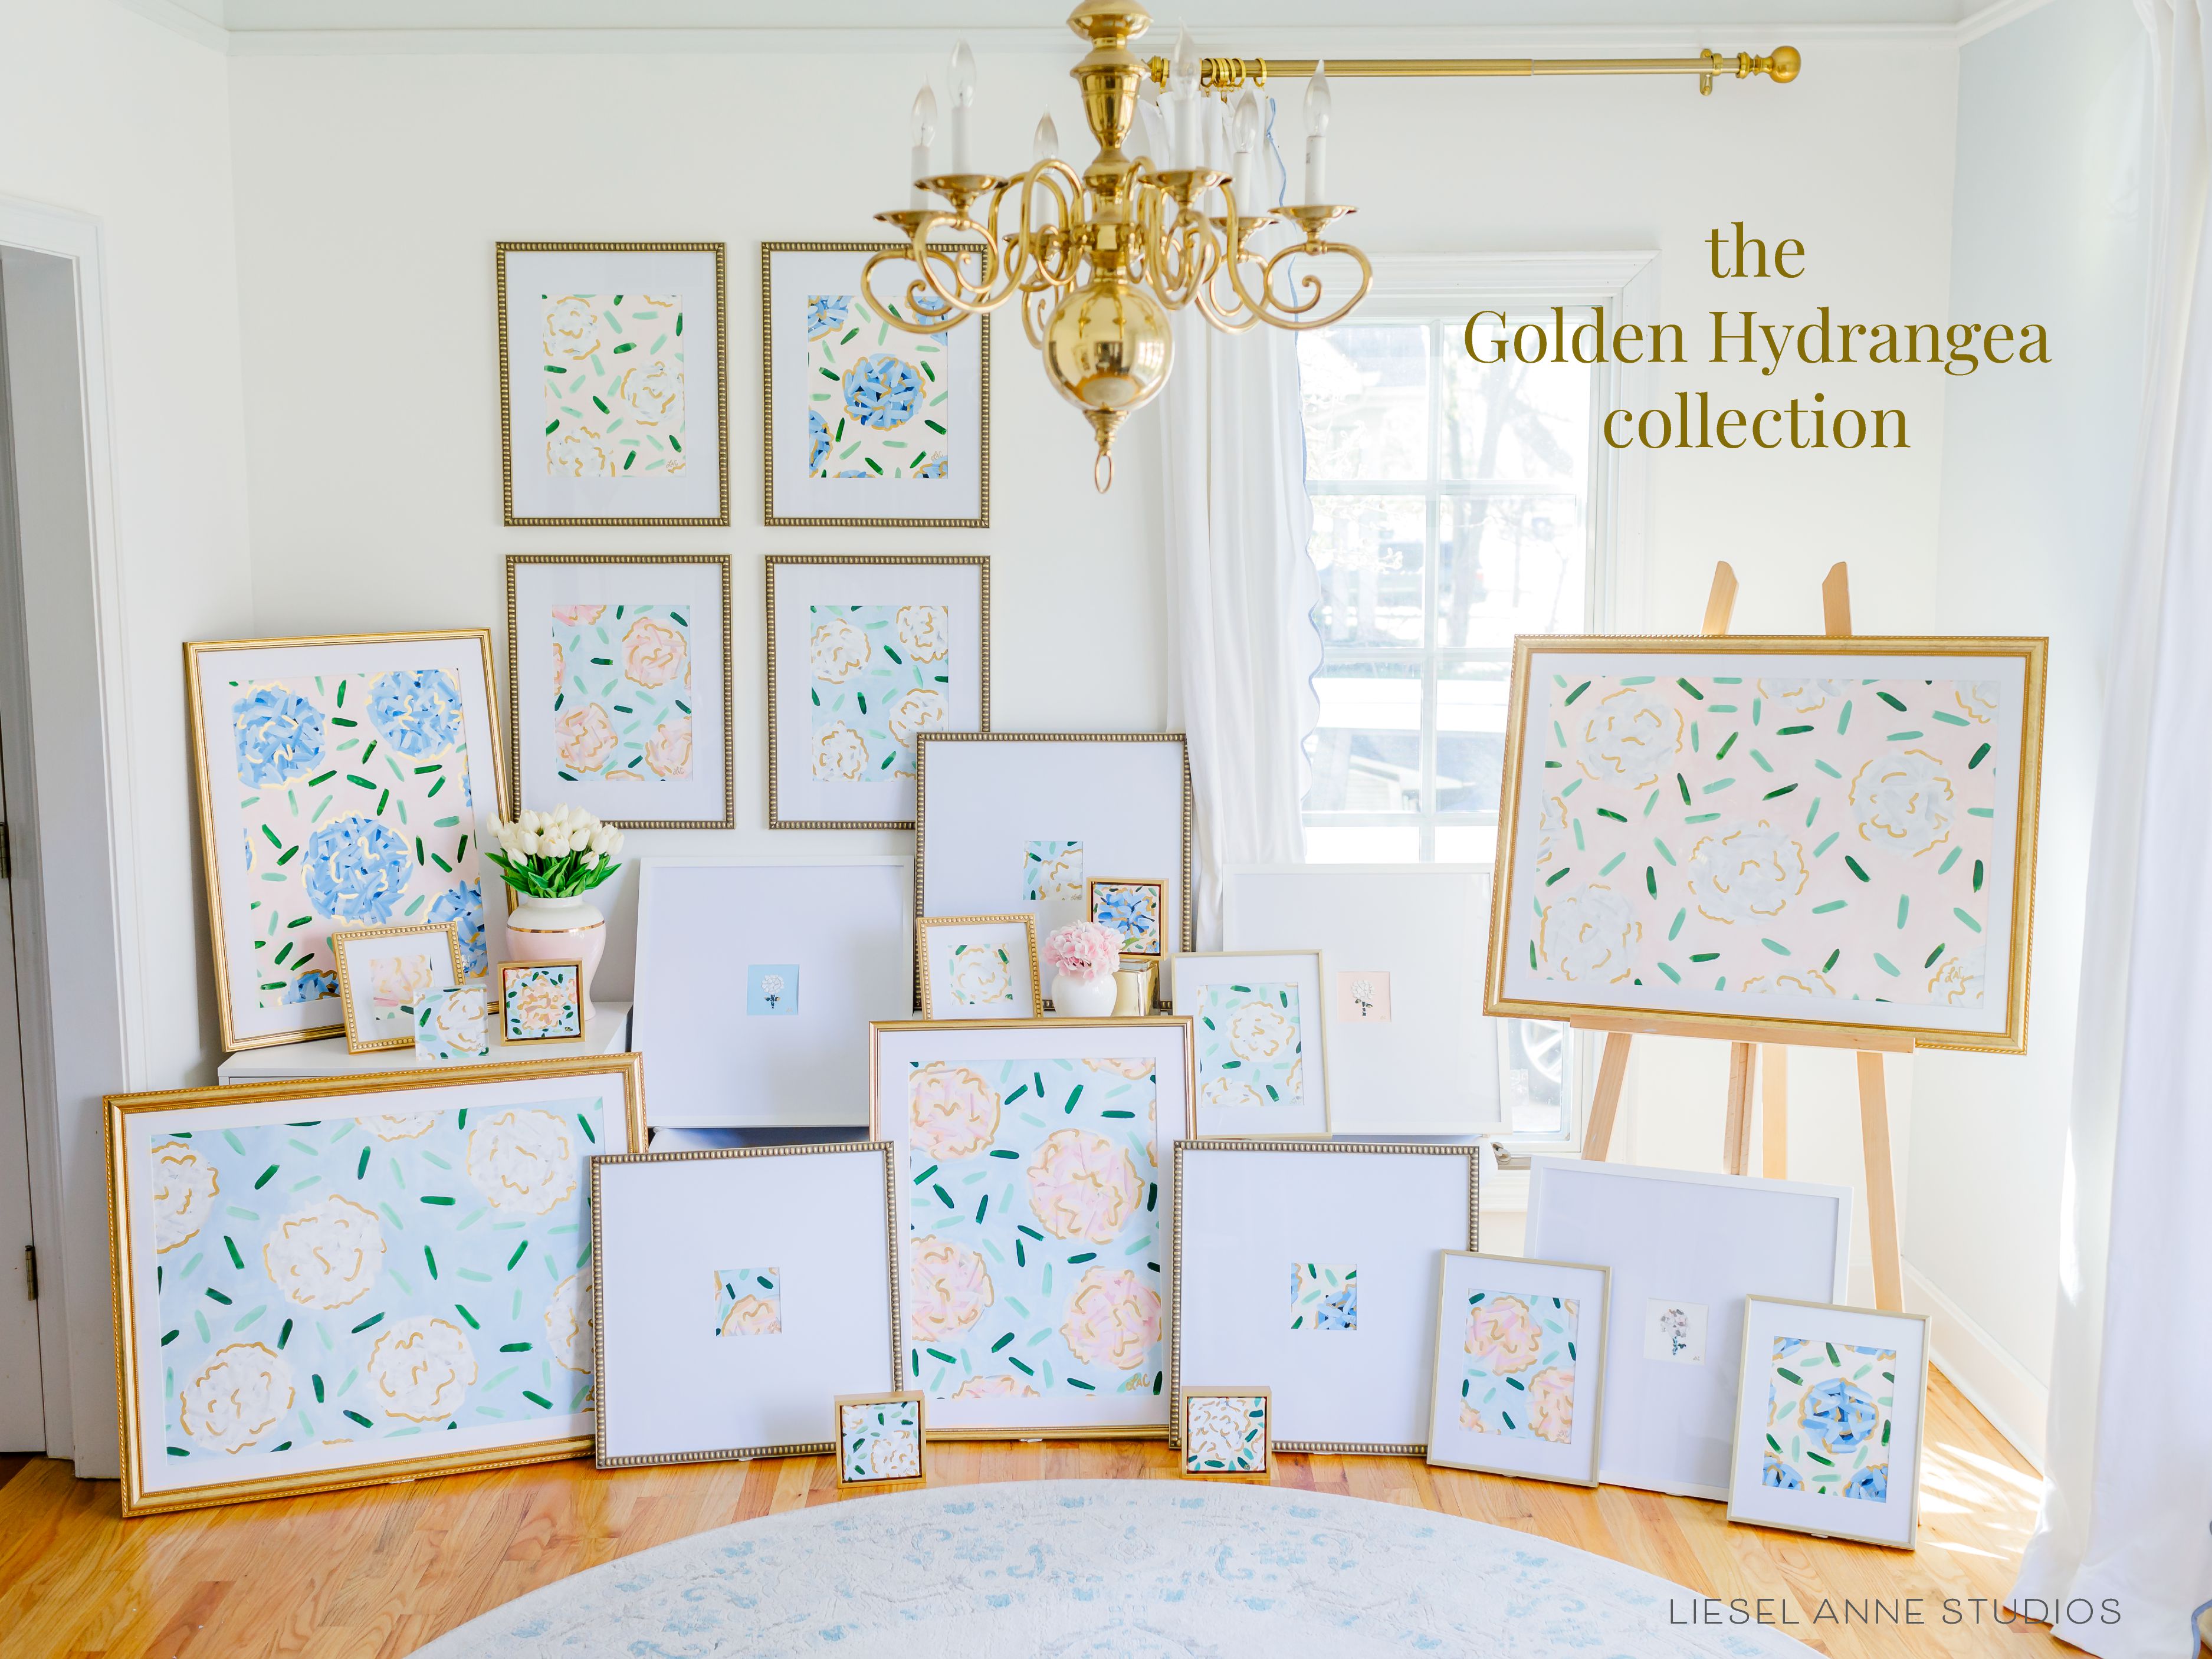 Golden Hydrangea Mini (Oversized Frame) | Blue & White XIX-Original artwork measures 5"x5" | Hand-Painted with gouache on cold press watercolor paper | Matted and framed in gold wood frame sized 20"x20" | Glare-resistant glass | Hanging hardware included | Features our signature Golden Hydrangea design with a light blue base, white hydrangeas and shimmery gold accents | Initialed in gold by the Liesel Anne (the artist) on the front and signed and dated on the back.-The Singing Little Bird